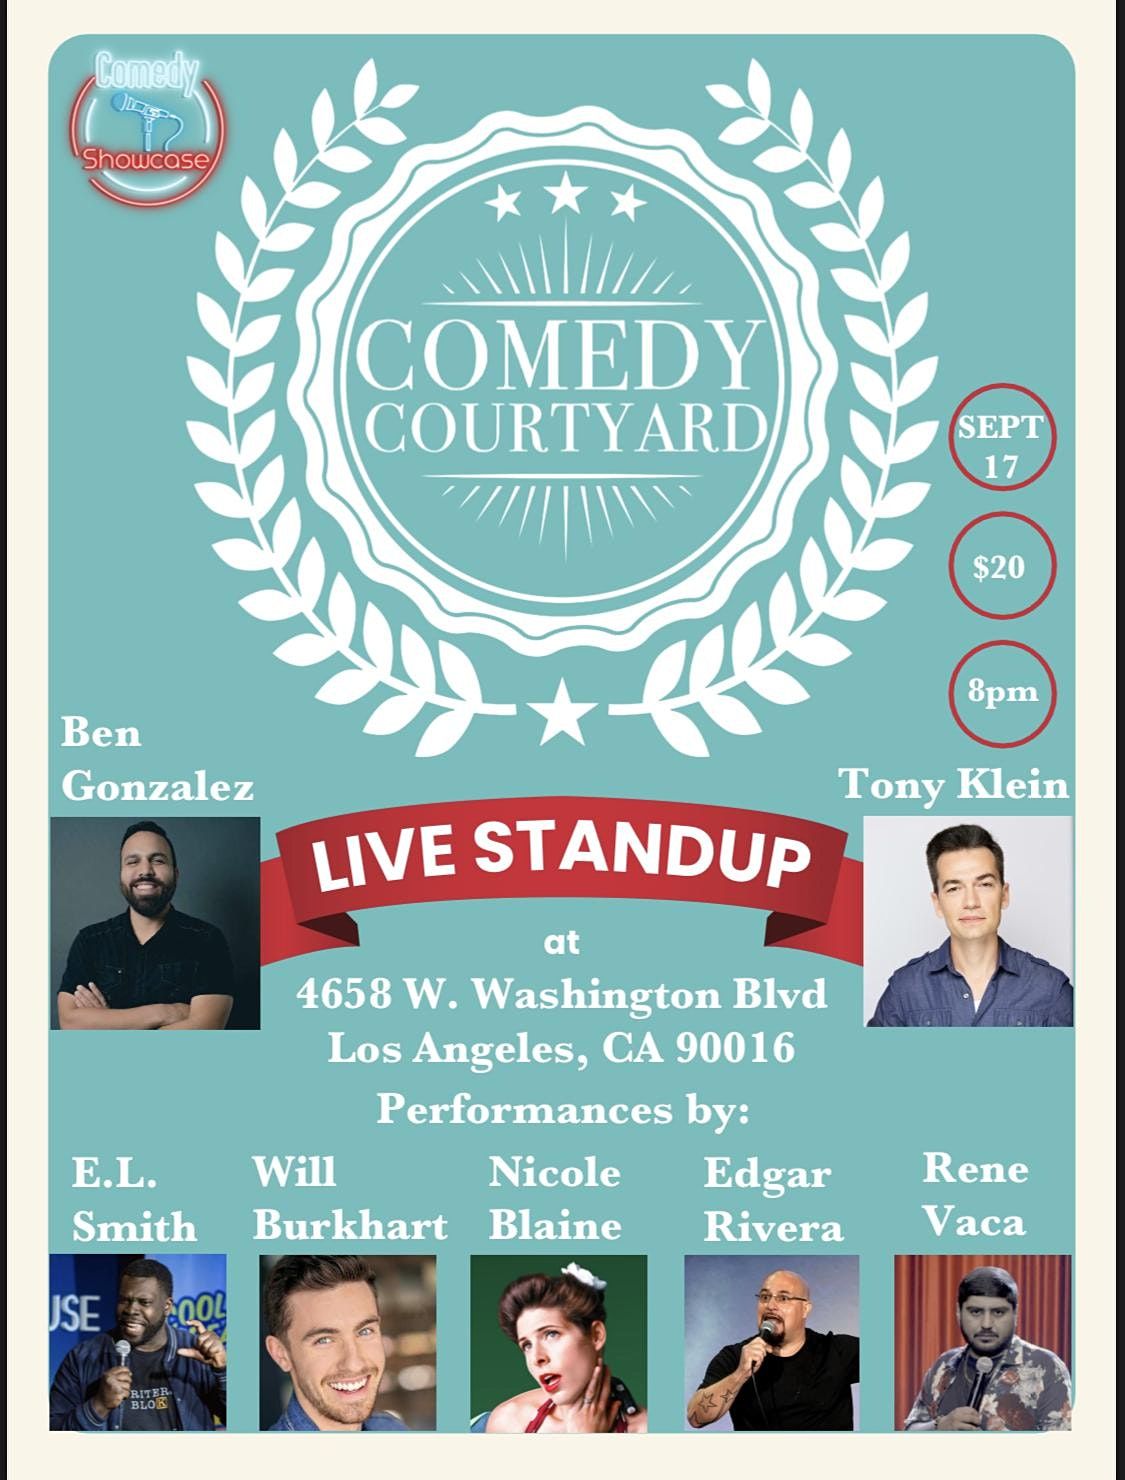 Comedy Courtyard is BACK!!!